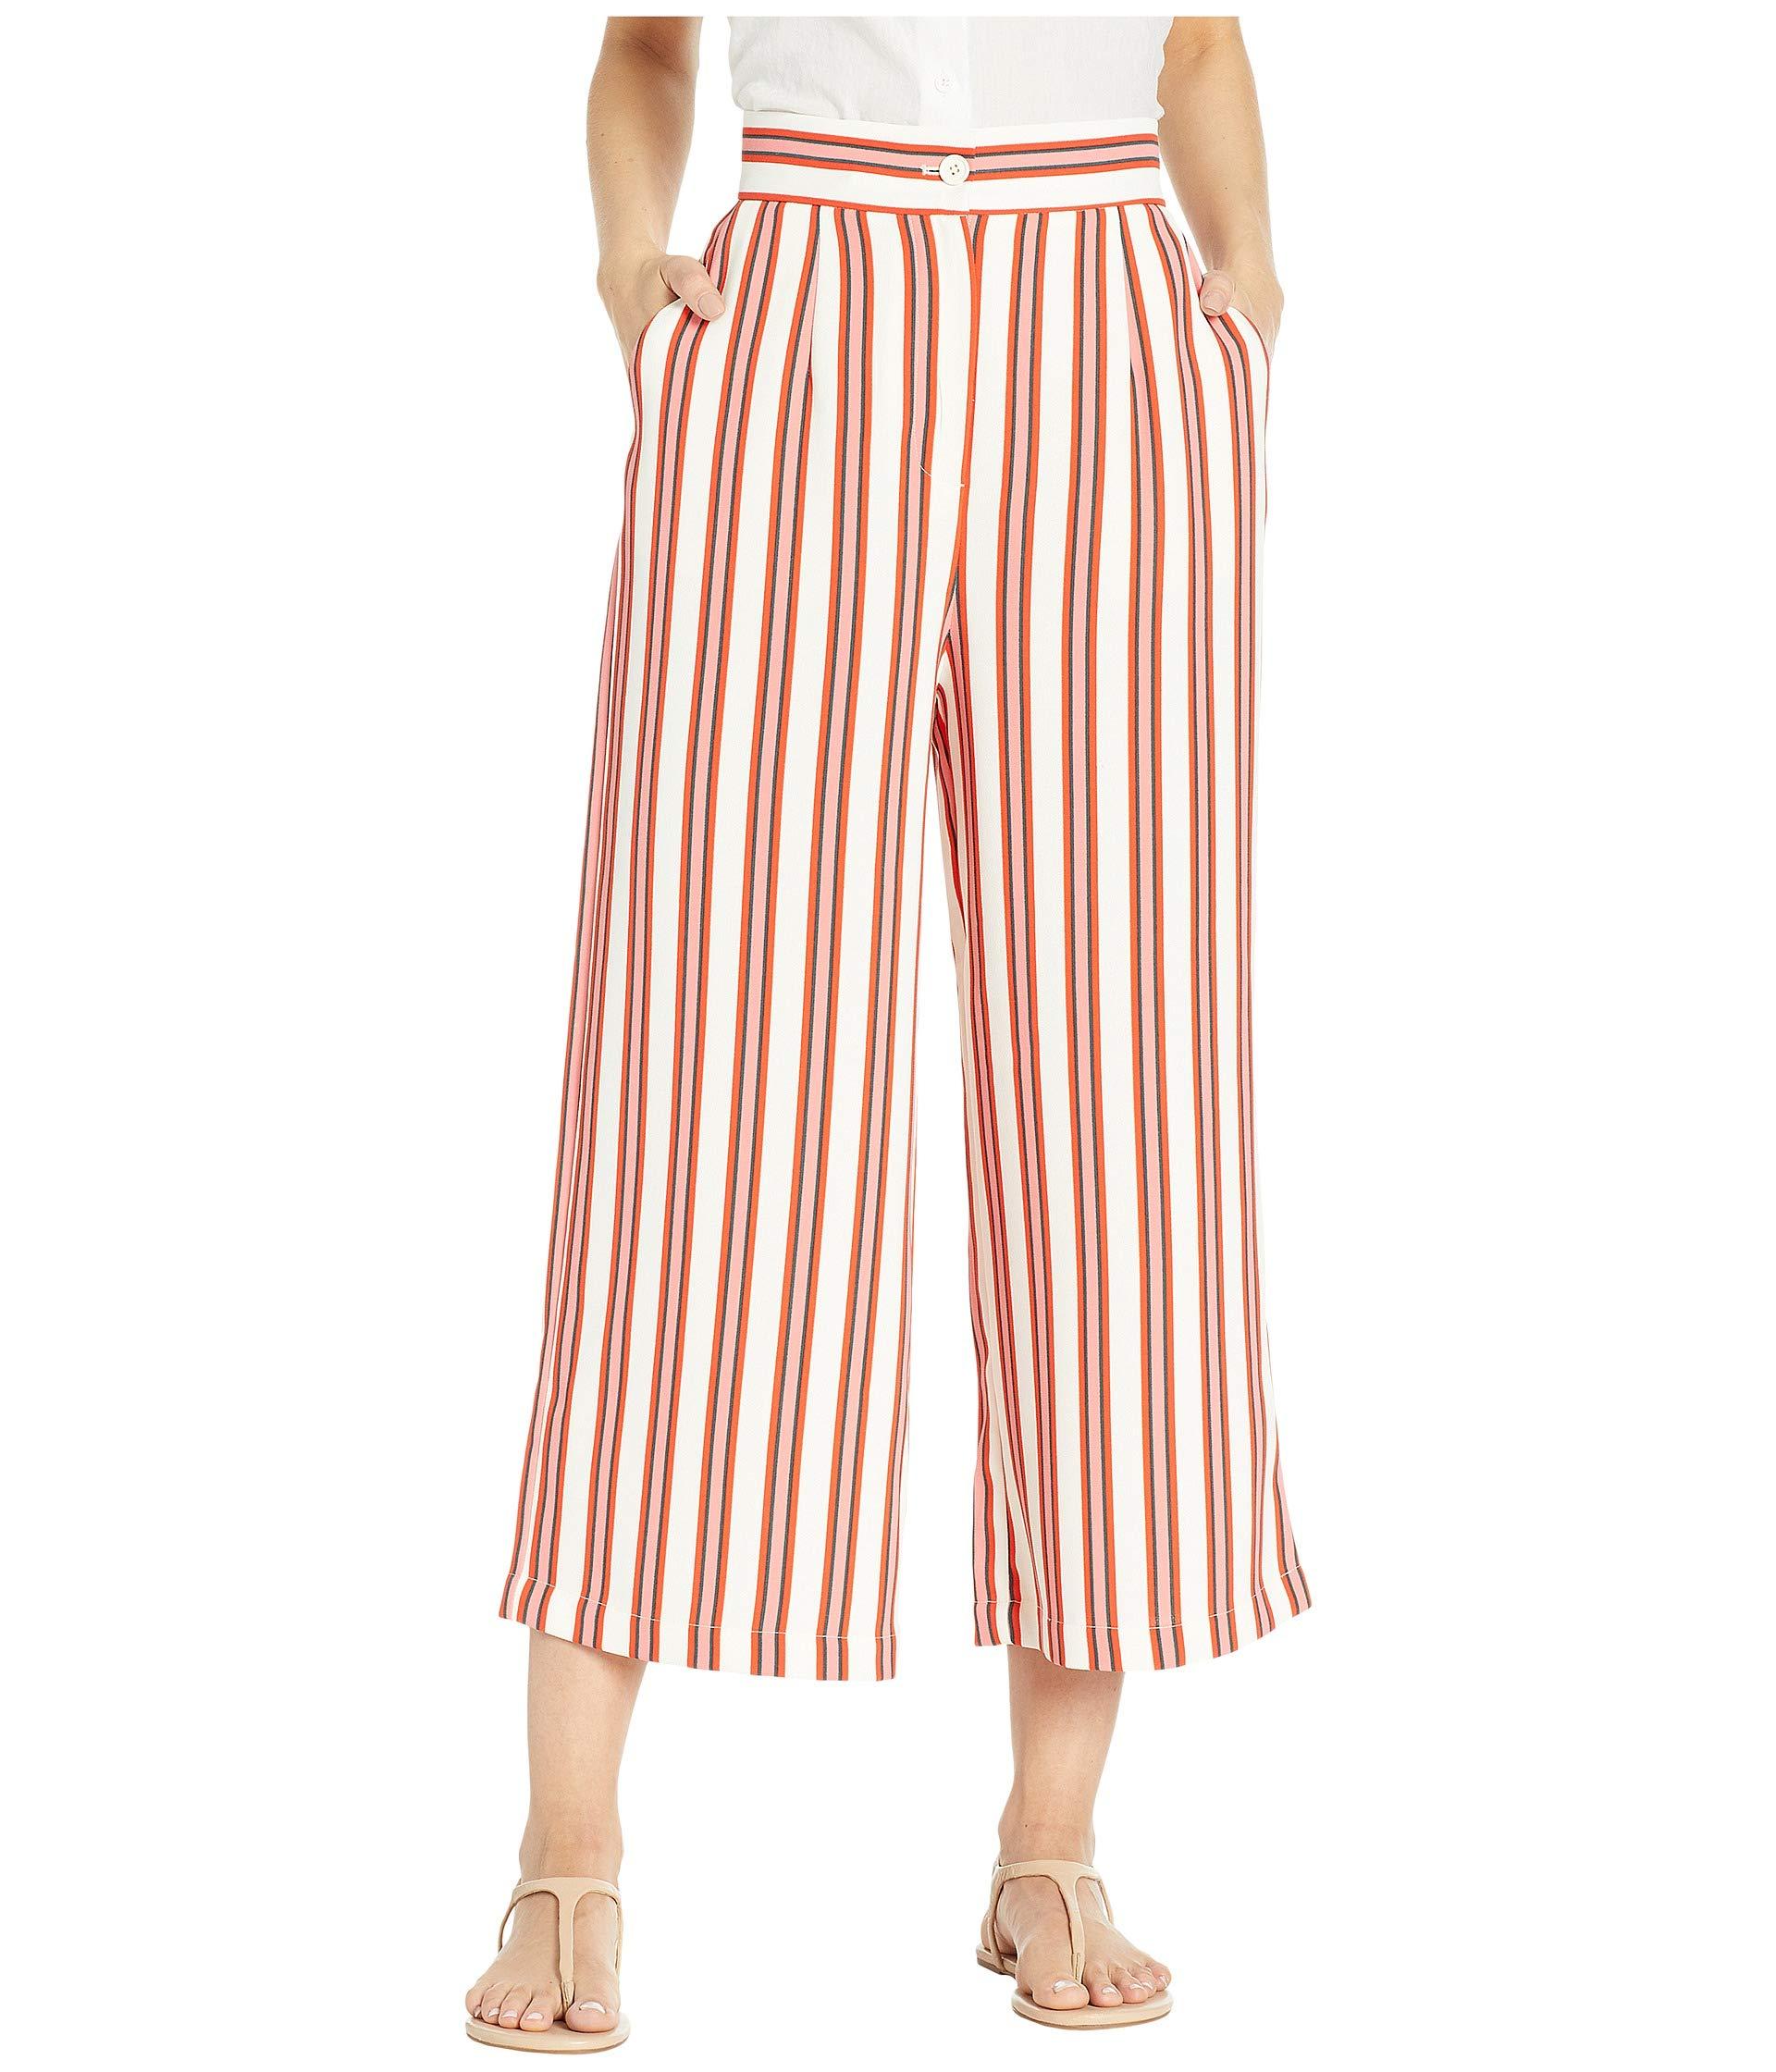 Lyst - Juicy Couture Bold Stripe Pants in Pink